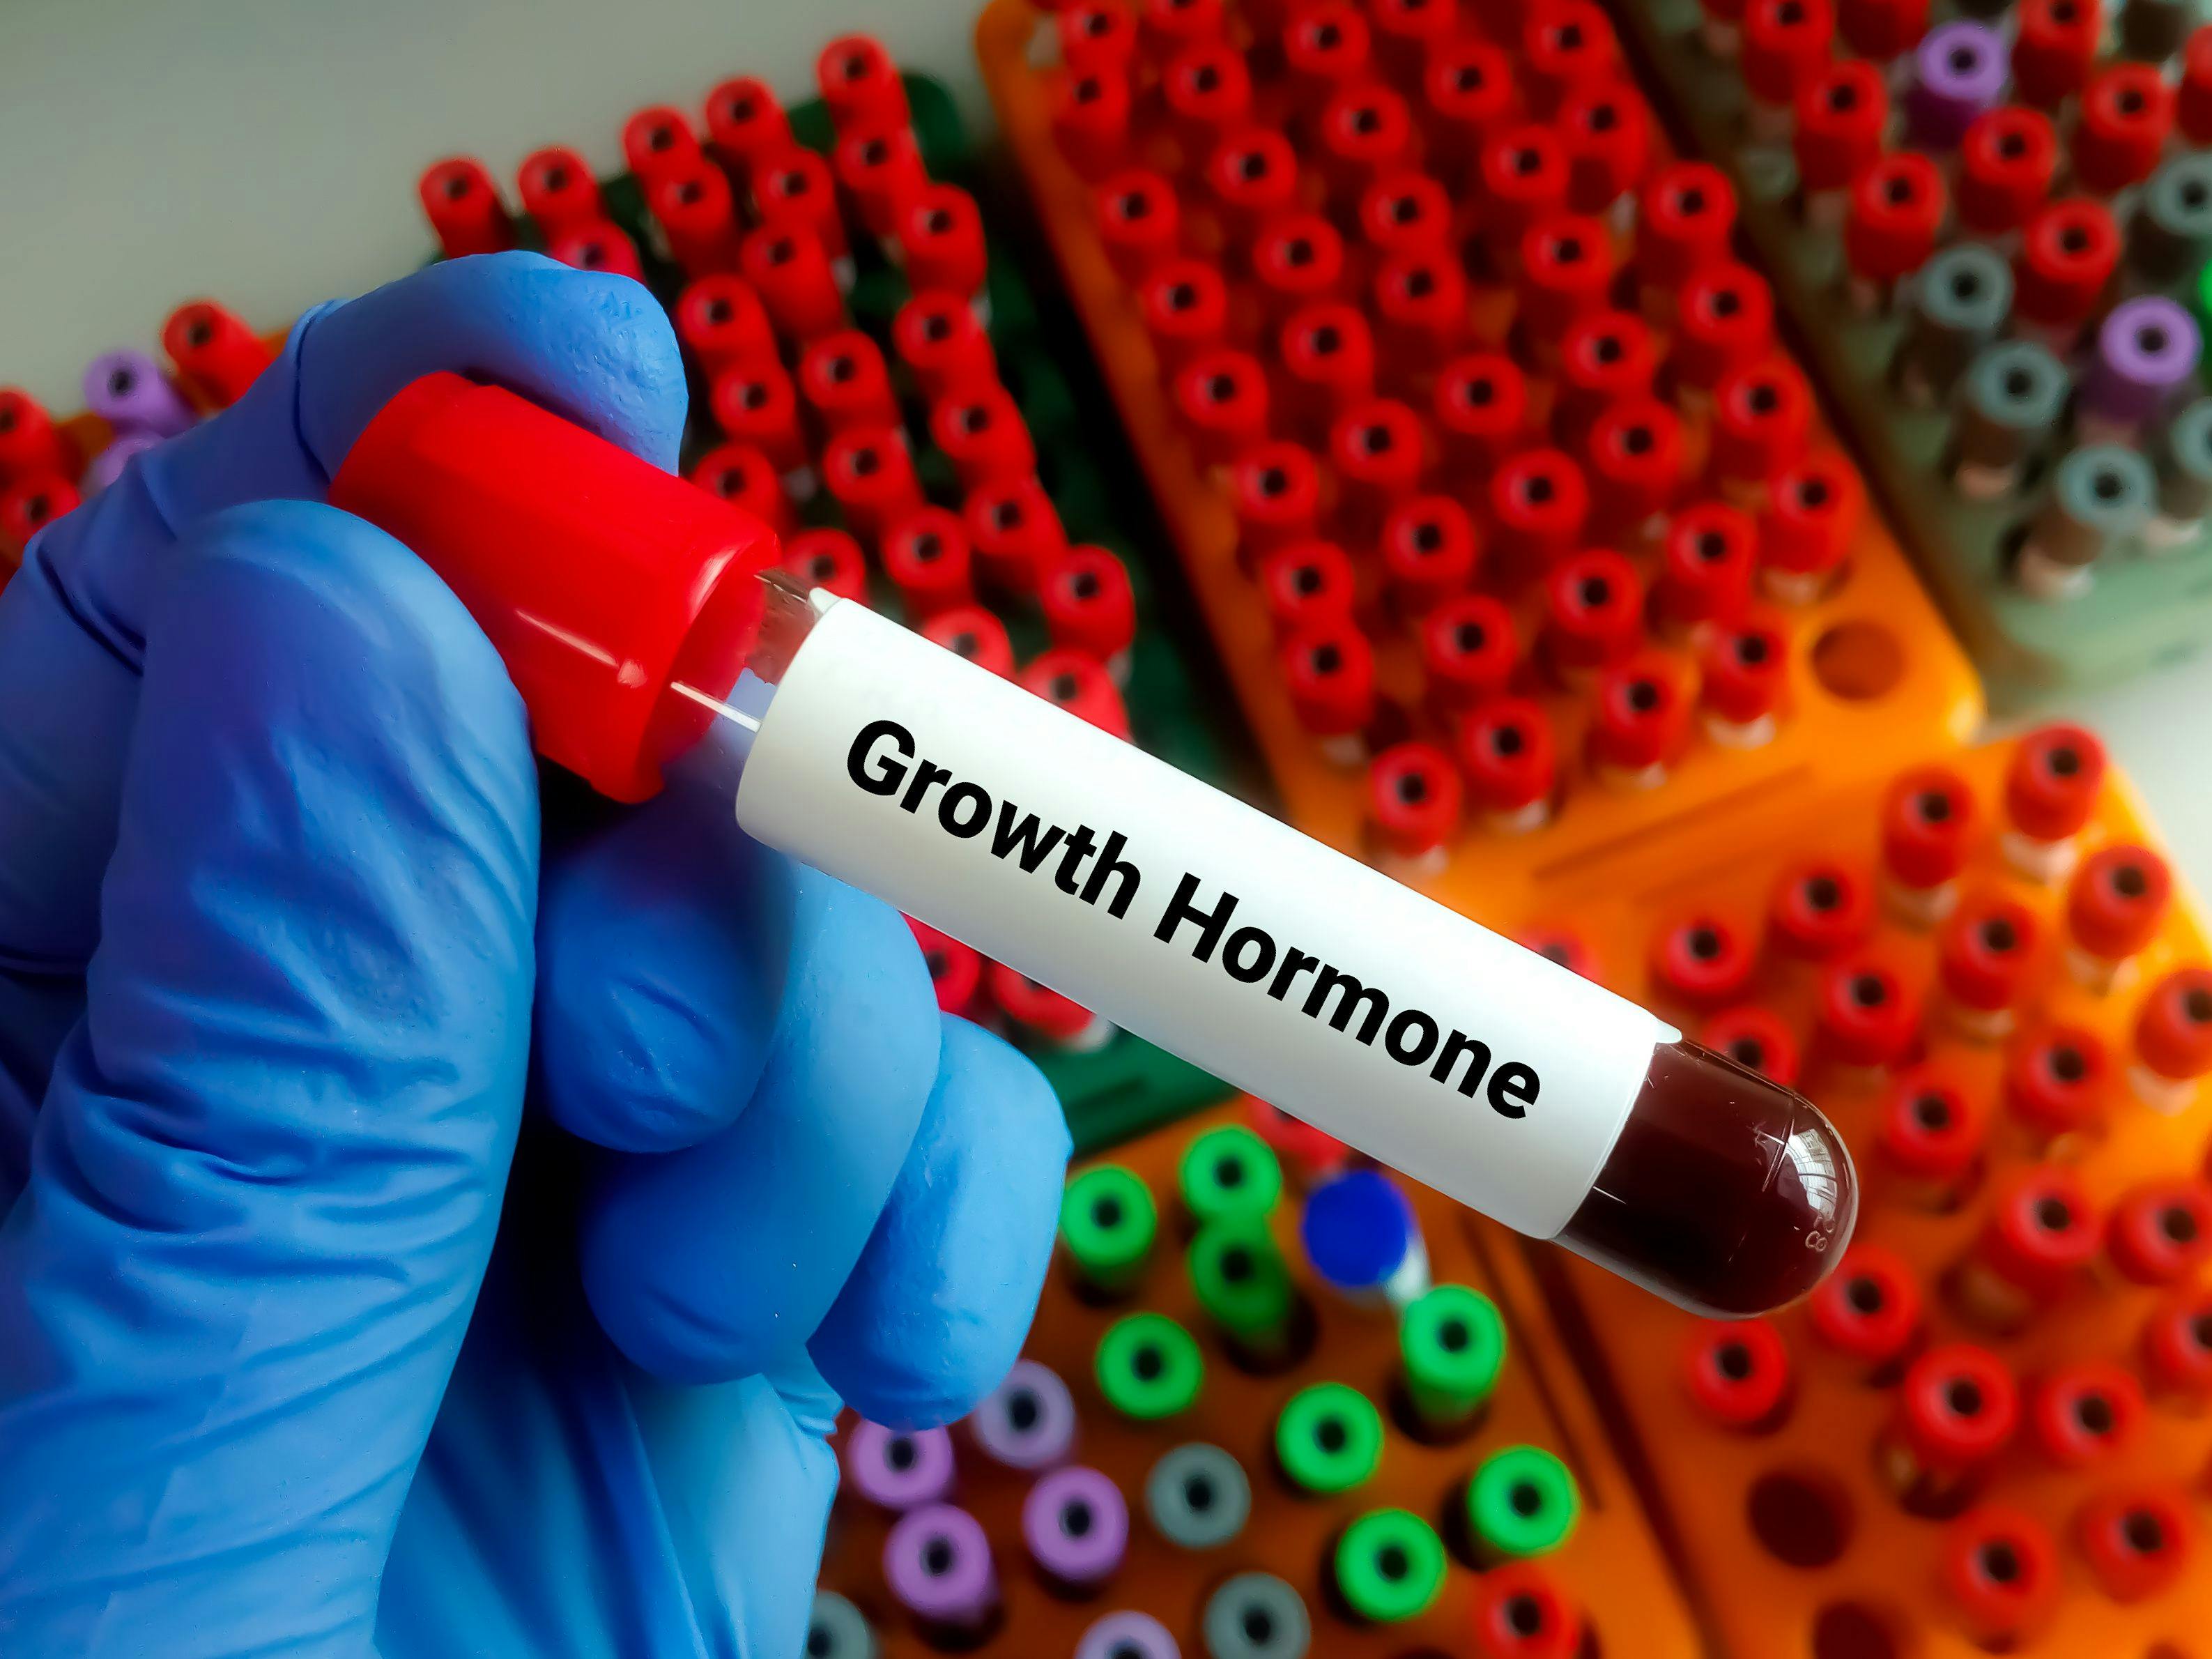 Blood sample for growth hormone test | Image Credit: Saiful52 - stock.adobe.com